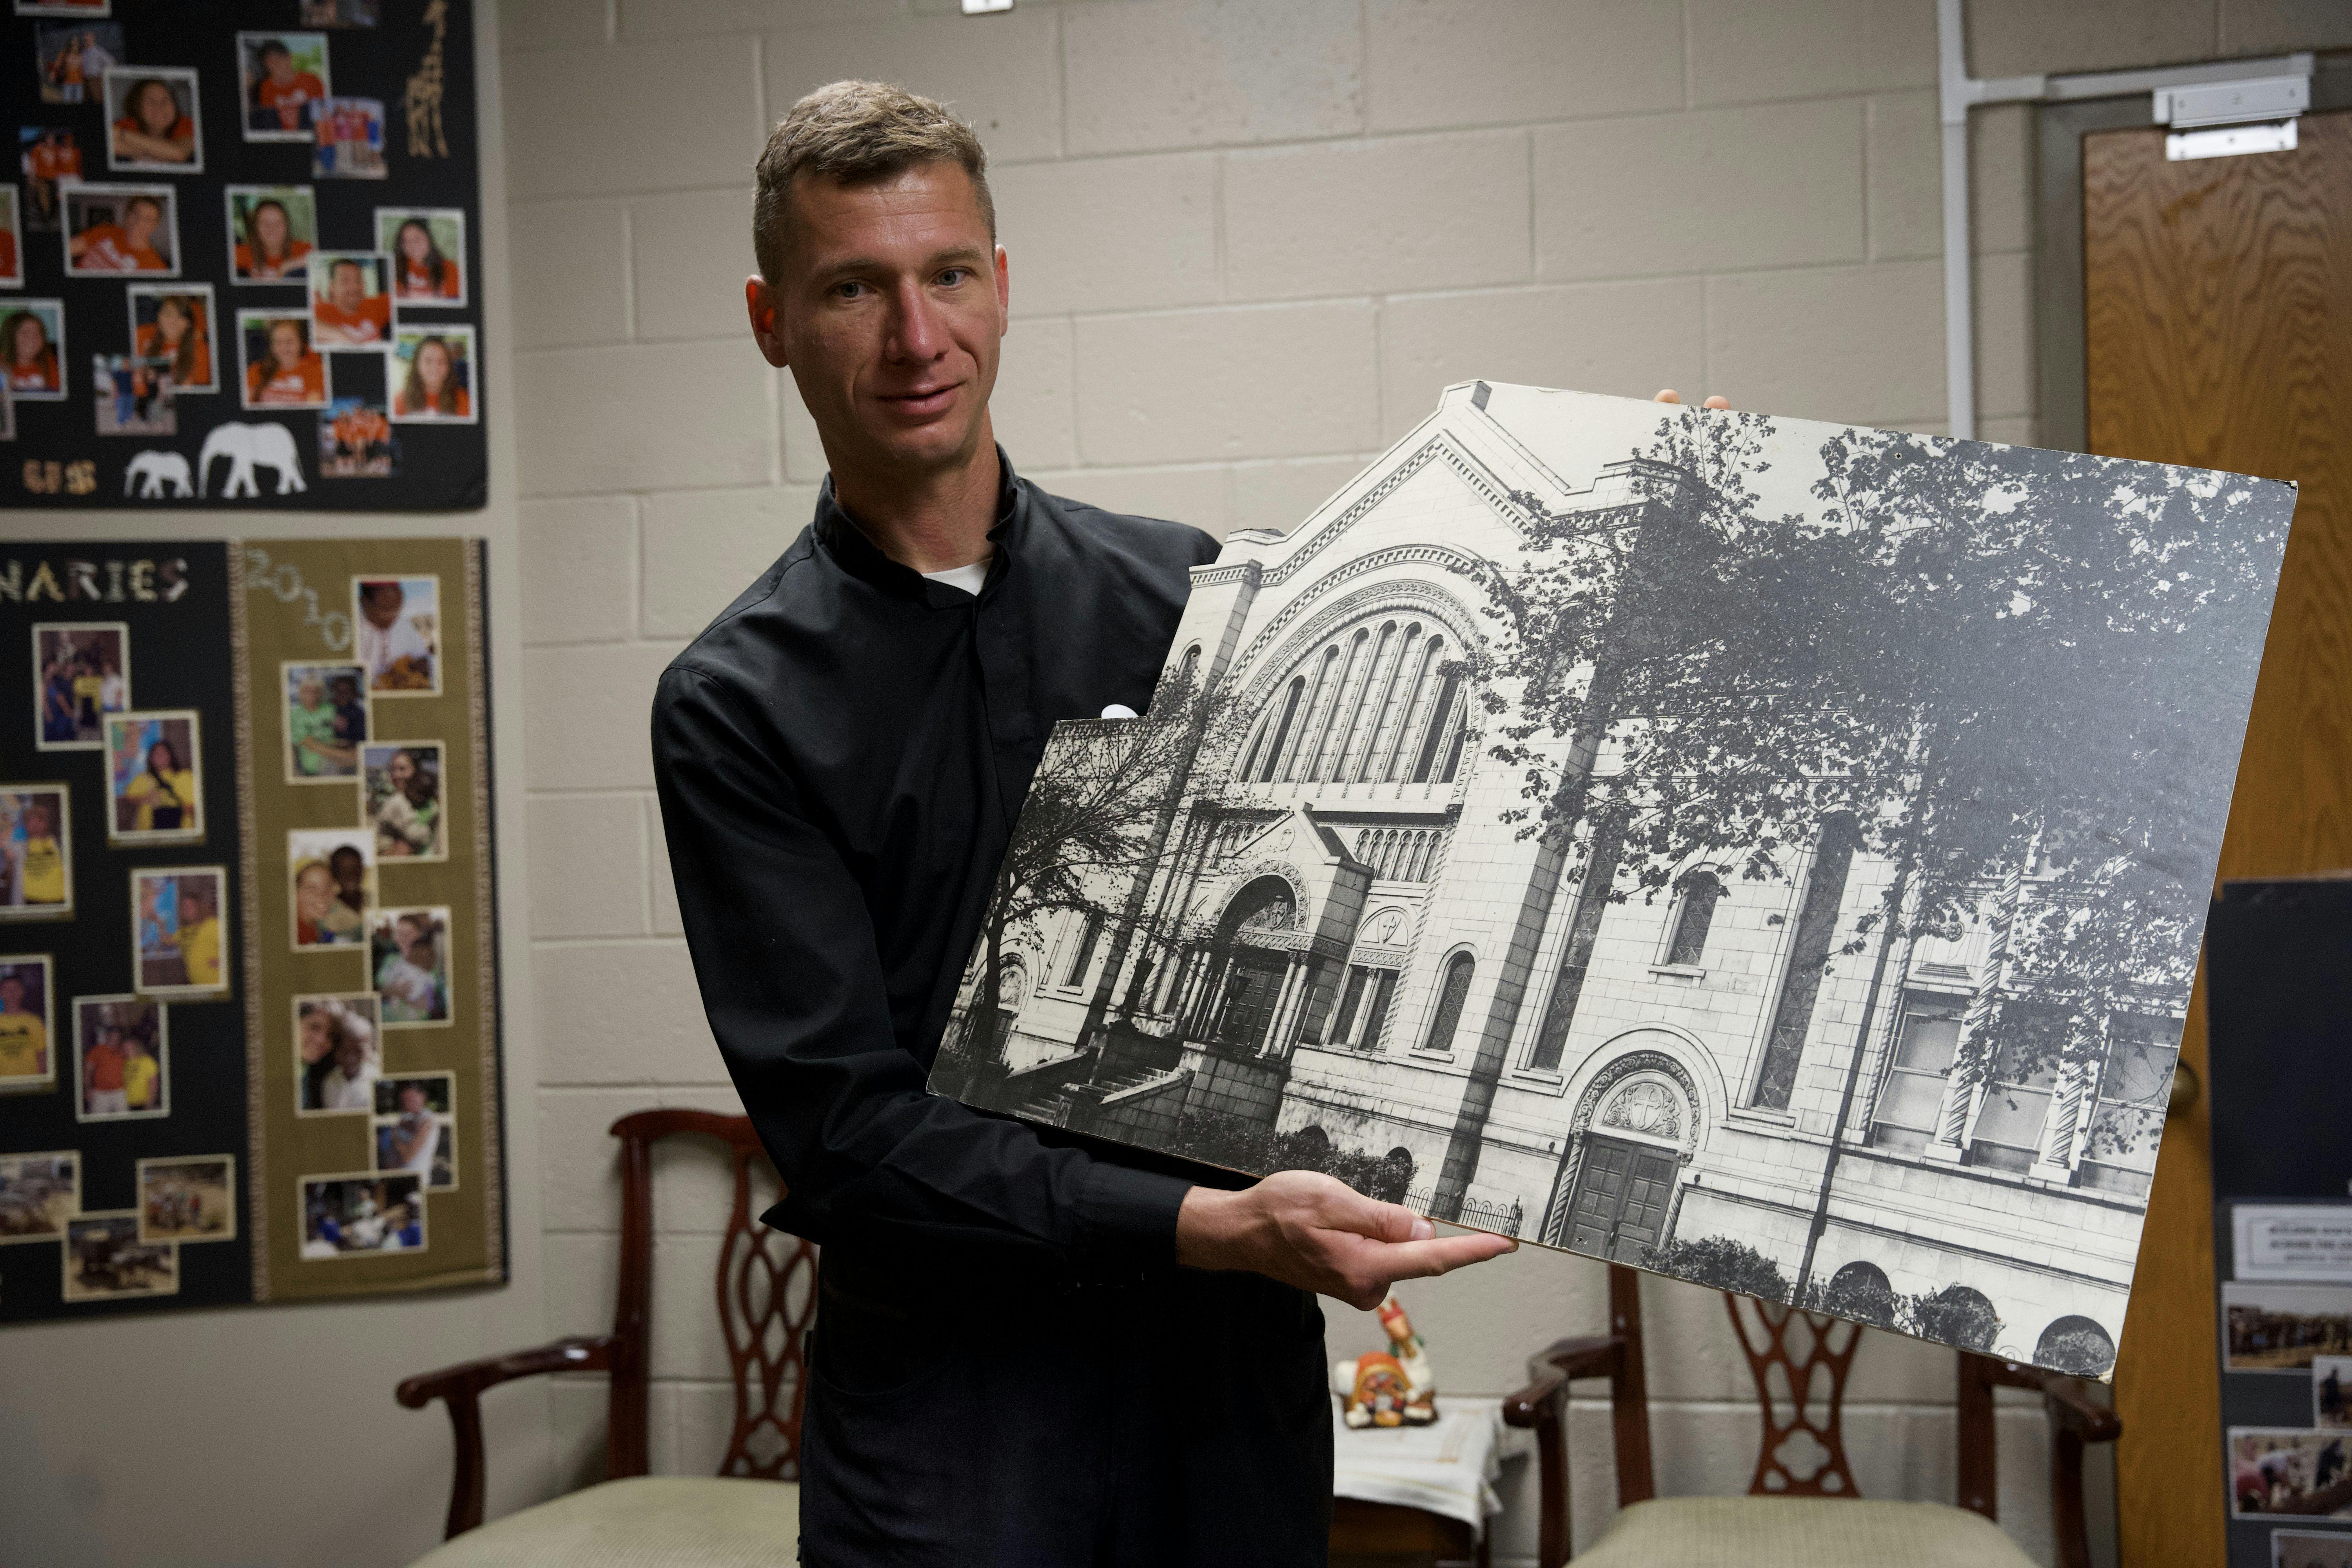 Fr. Malek holds a cutout image of the second brick church. Many of his current parishioners attended this church before the parish moved to current building in 1988, and still talk about how beautiful it was.